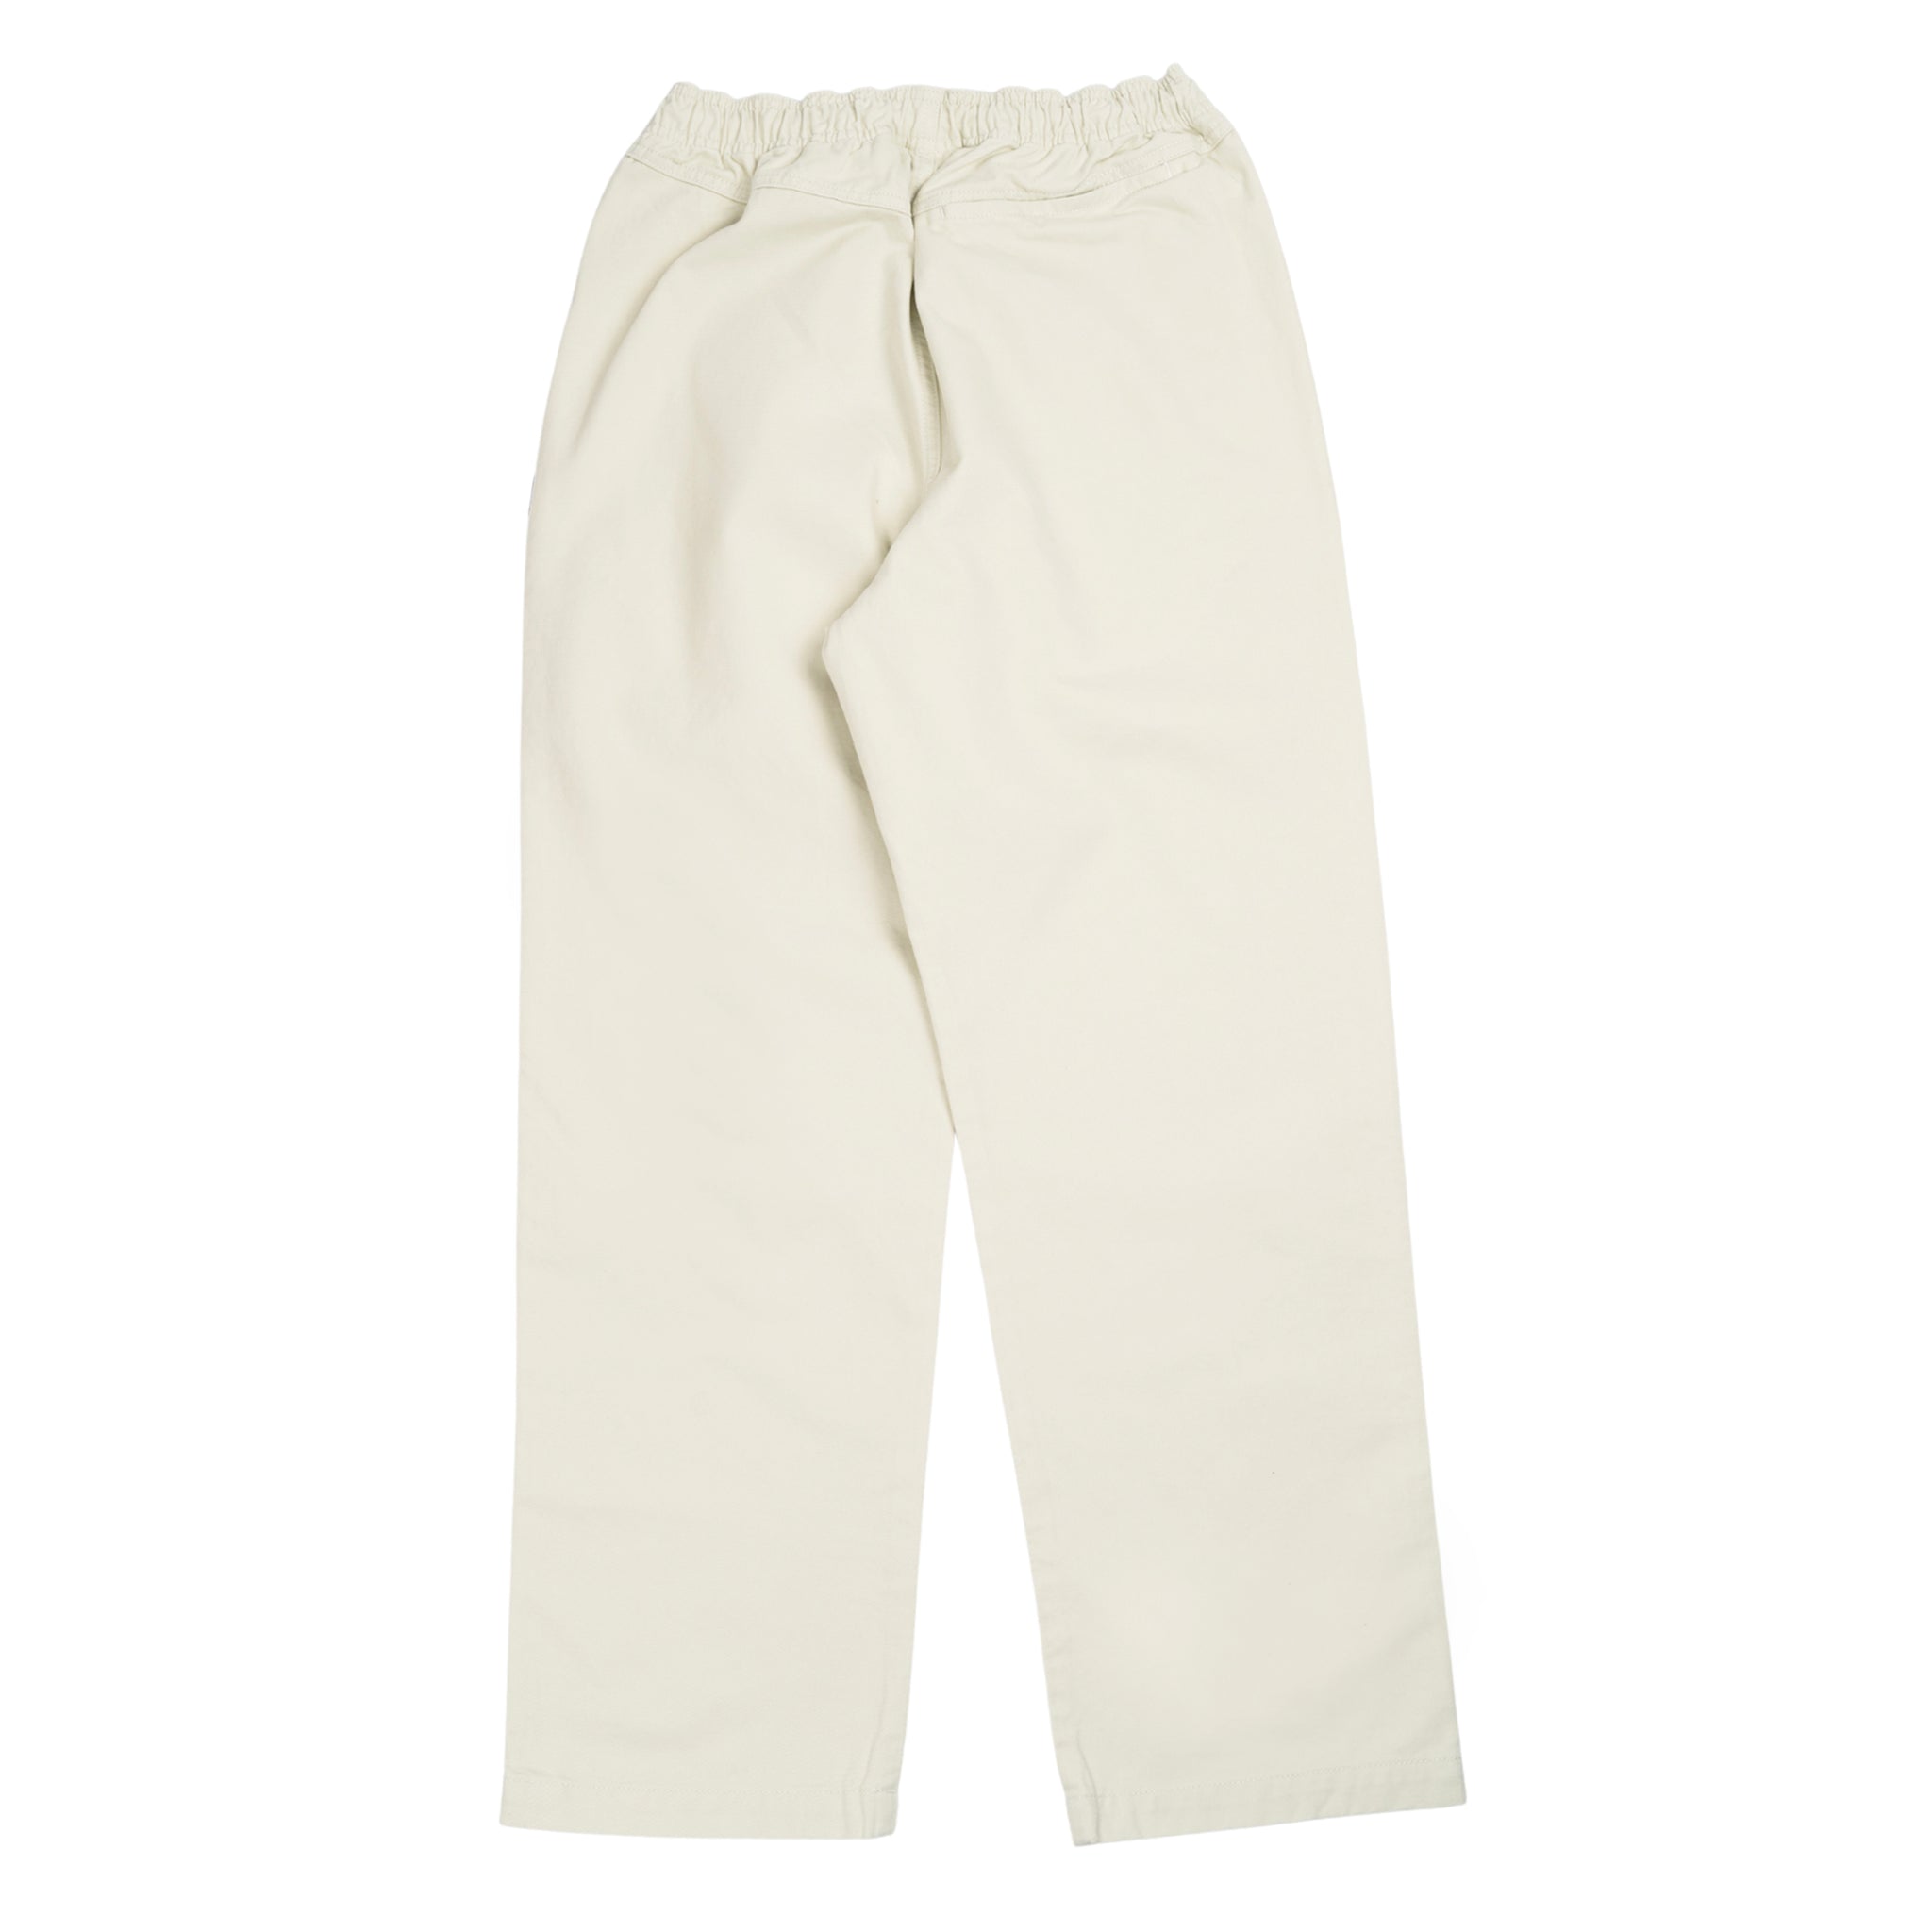 Brushed Beach pantalone in cotone in osso